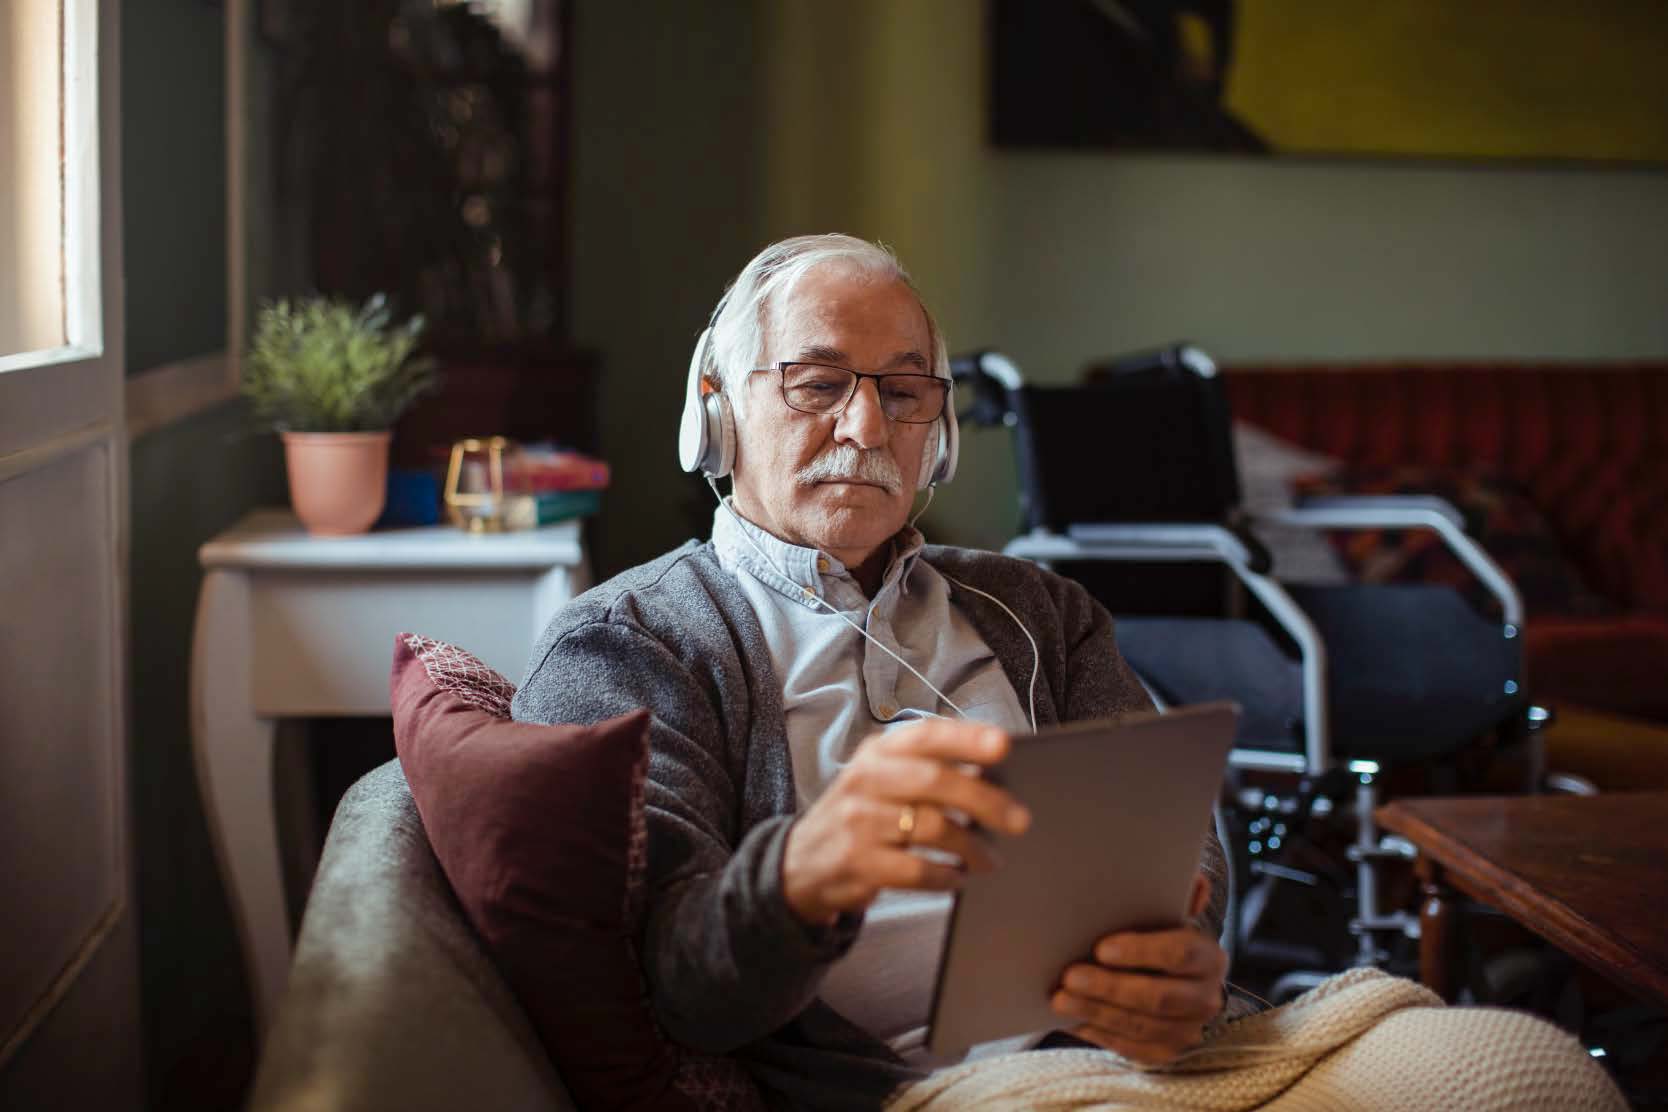 Elderly man sitting on a couch and wearing a headset while reading from his iPad